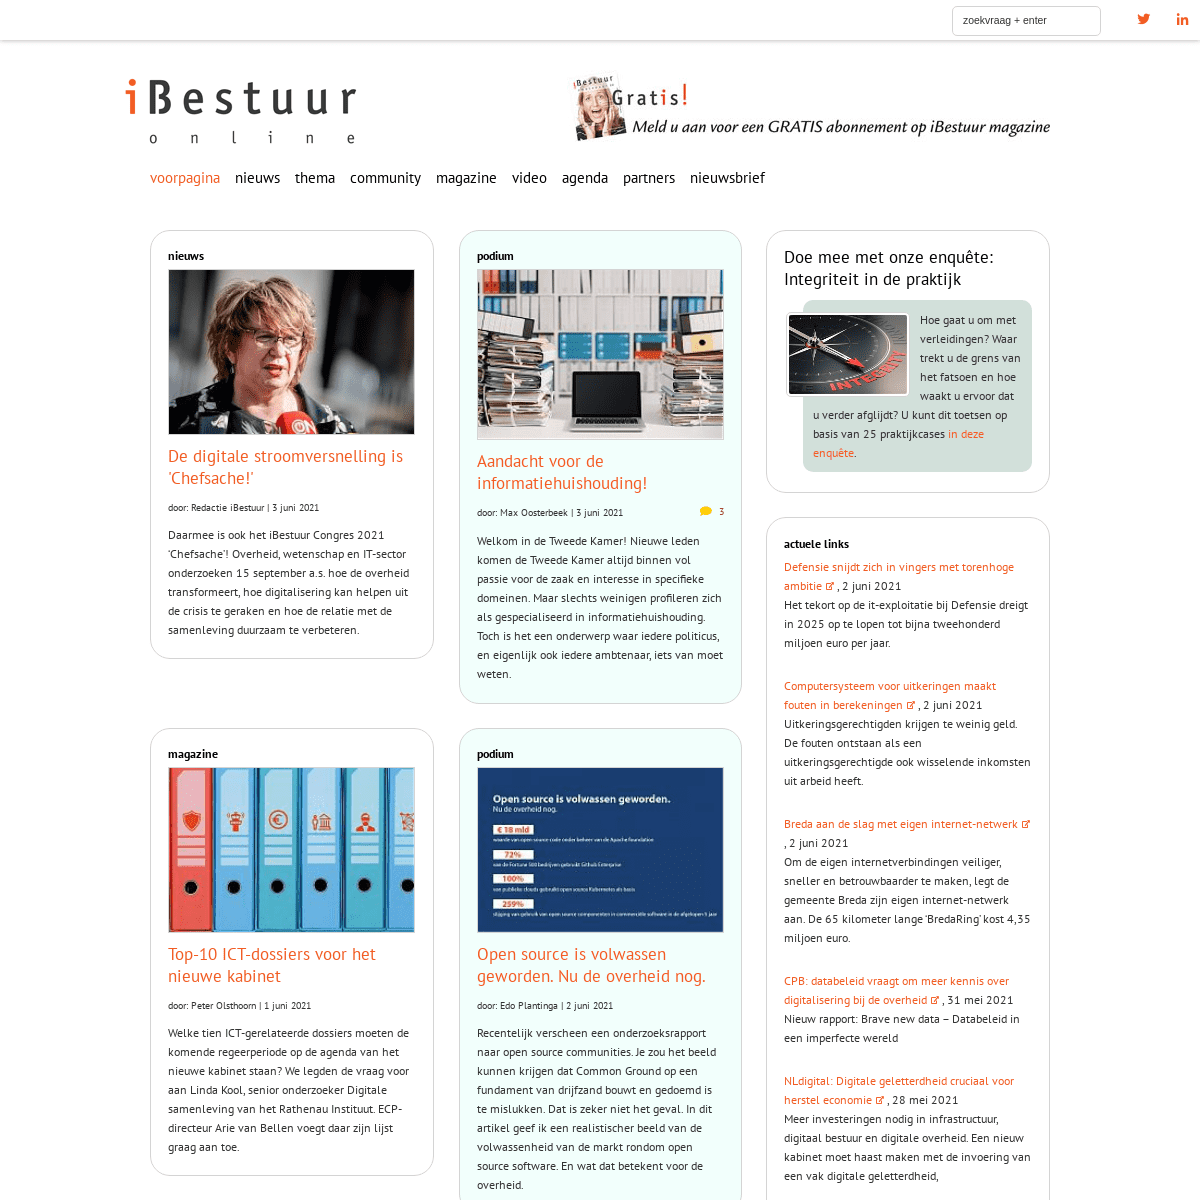 A complete backup of https://ibestuur.nl